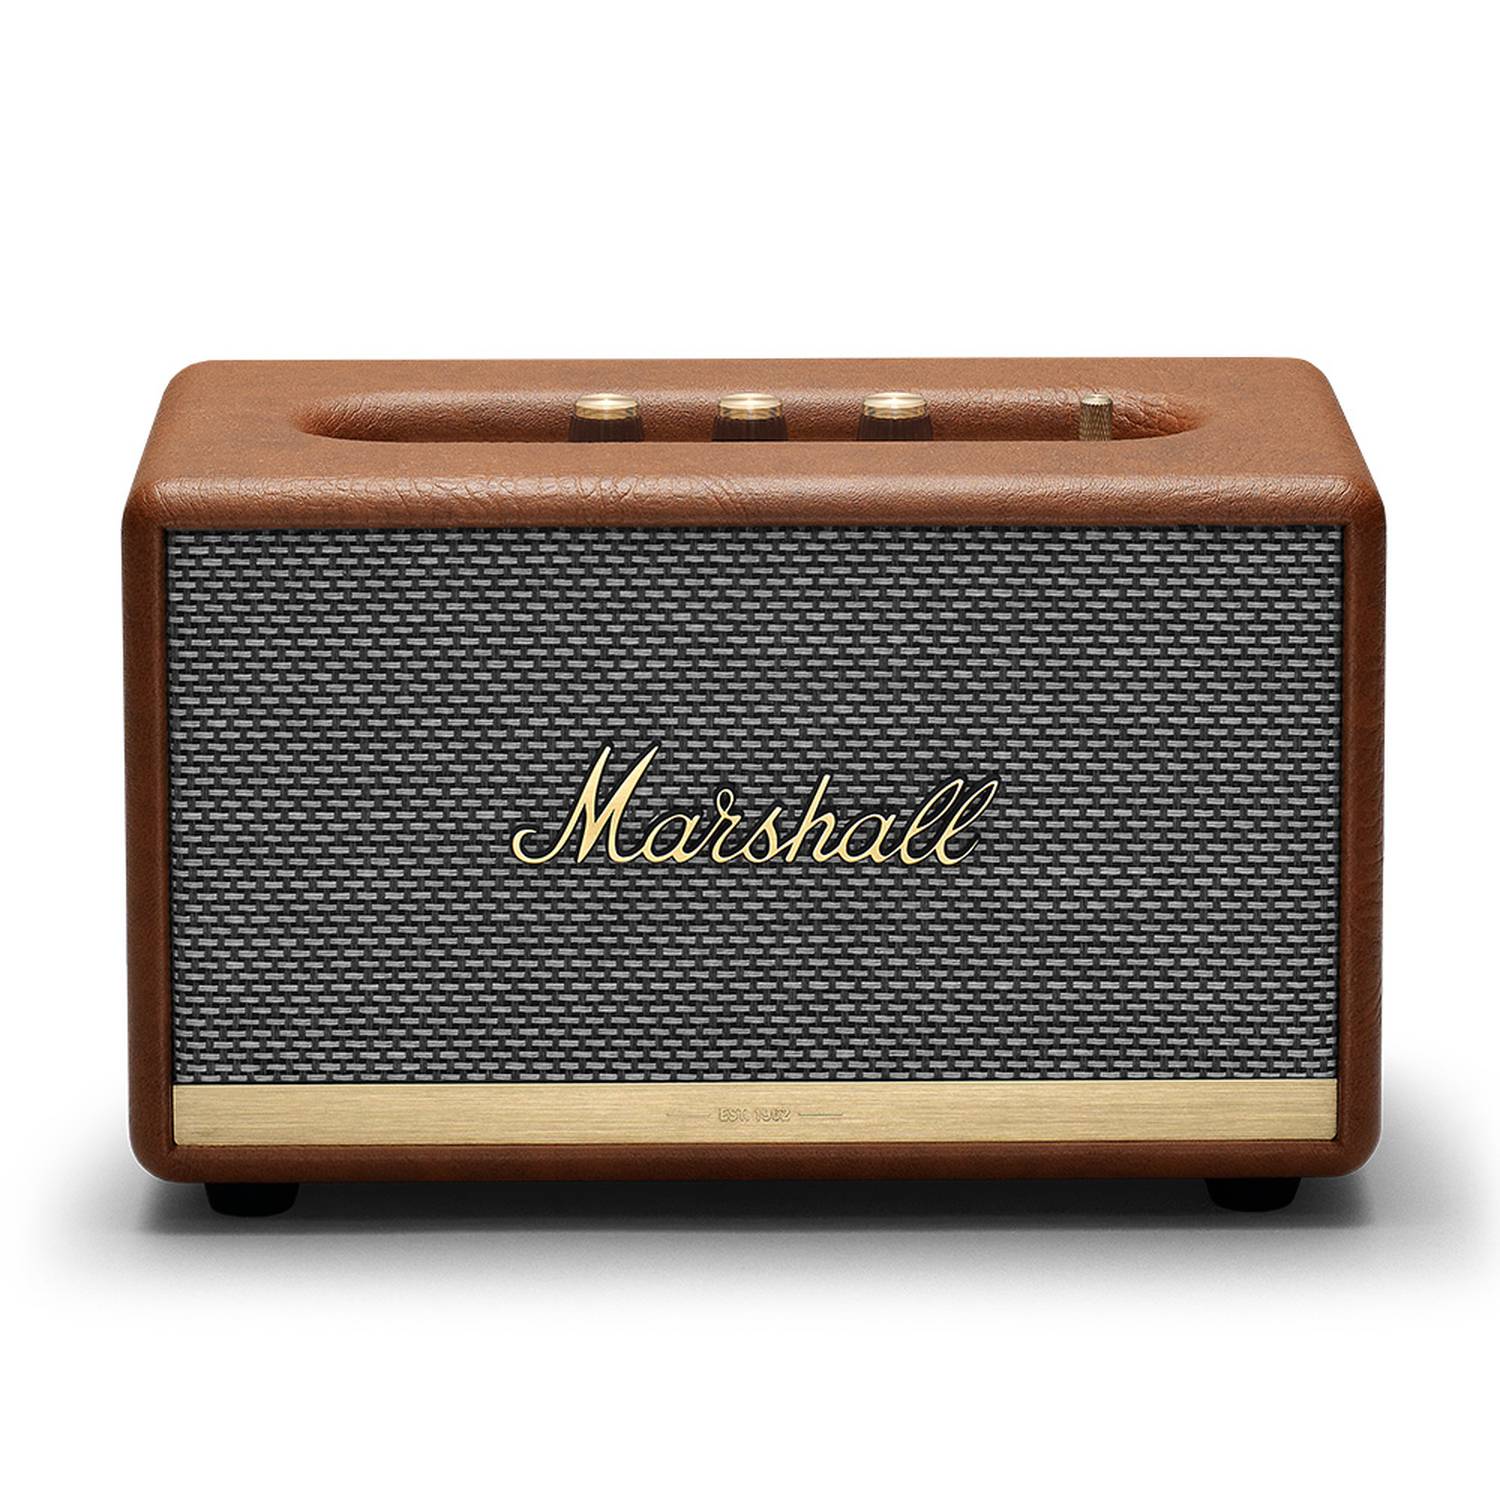 Marshall Acton II Wireless Larger Than Life Sound Stereo Speaker